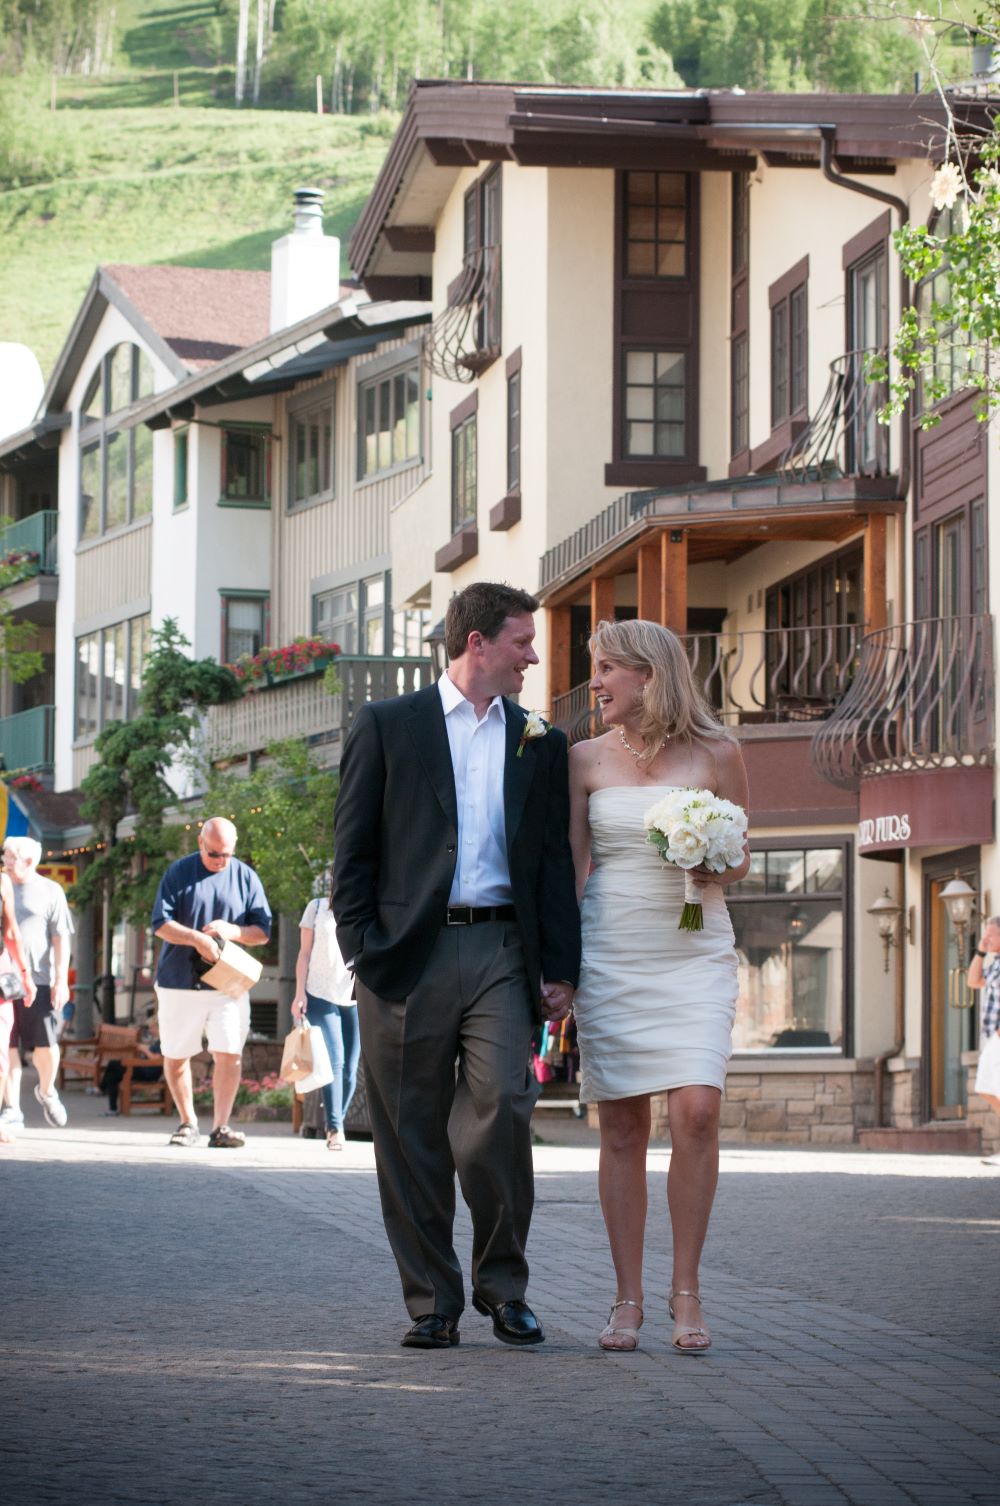 Newlyweds in town Vail